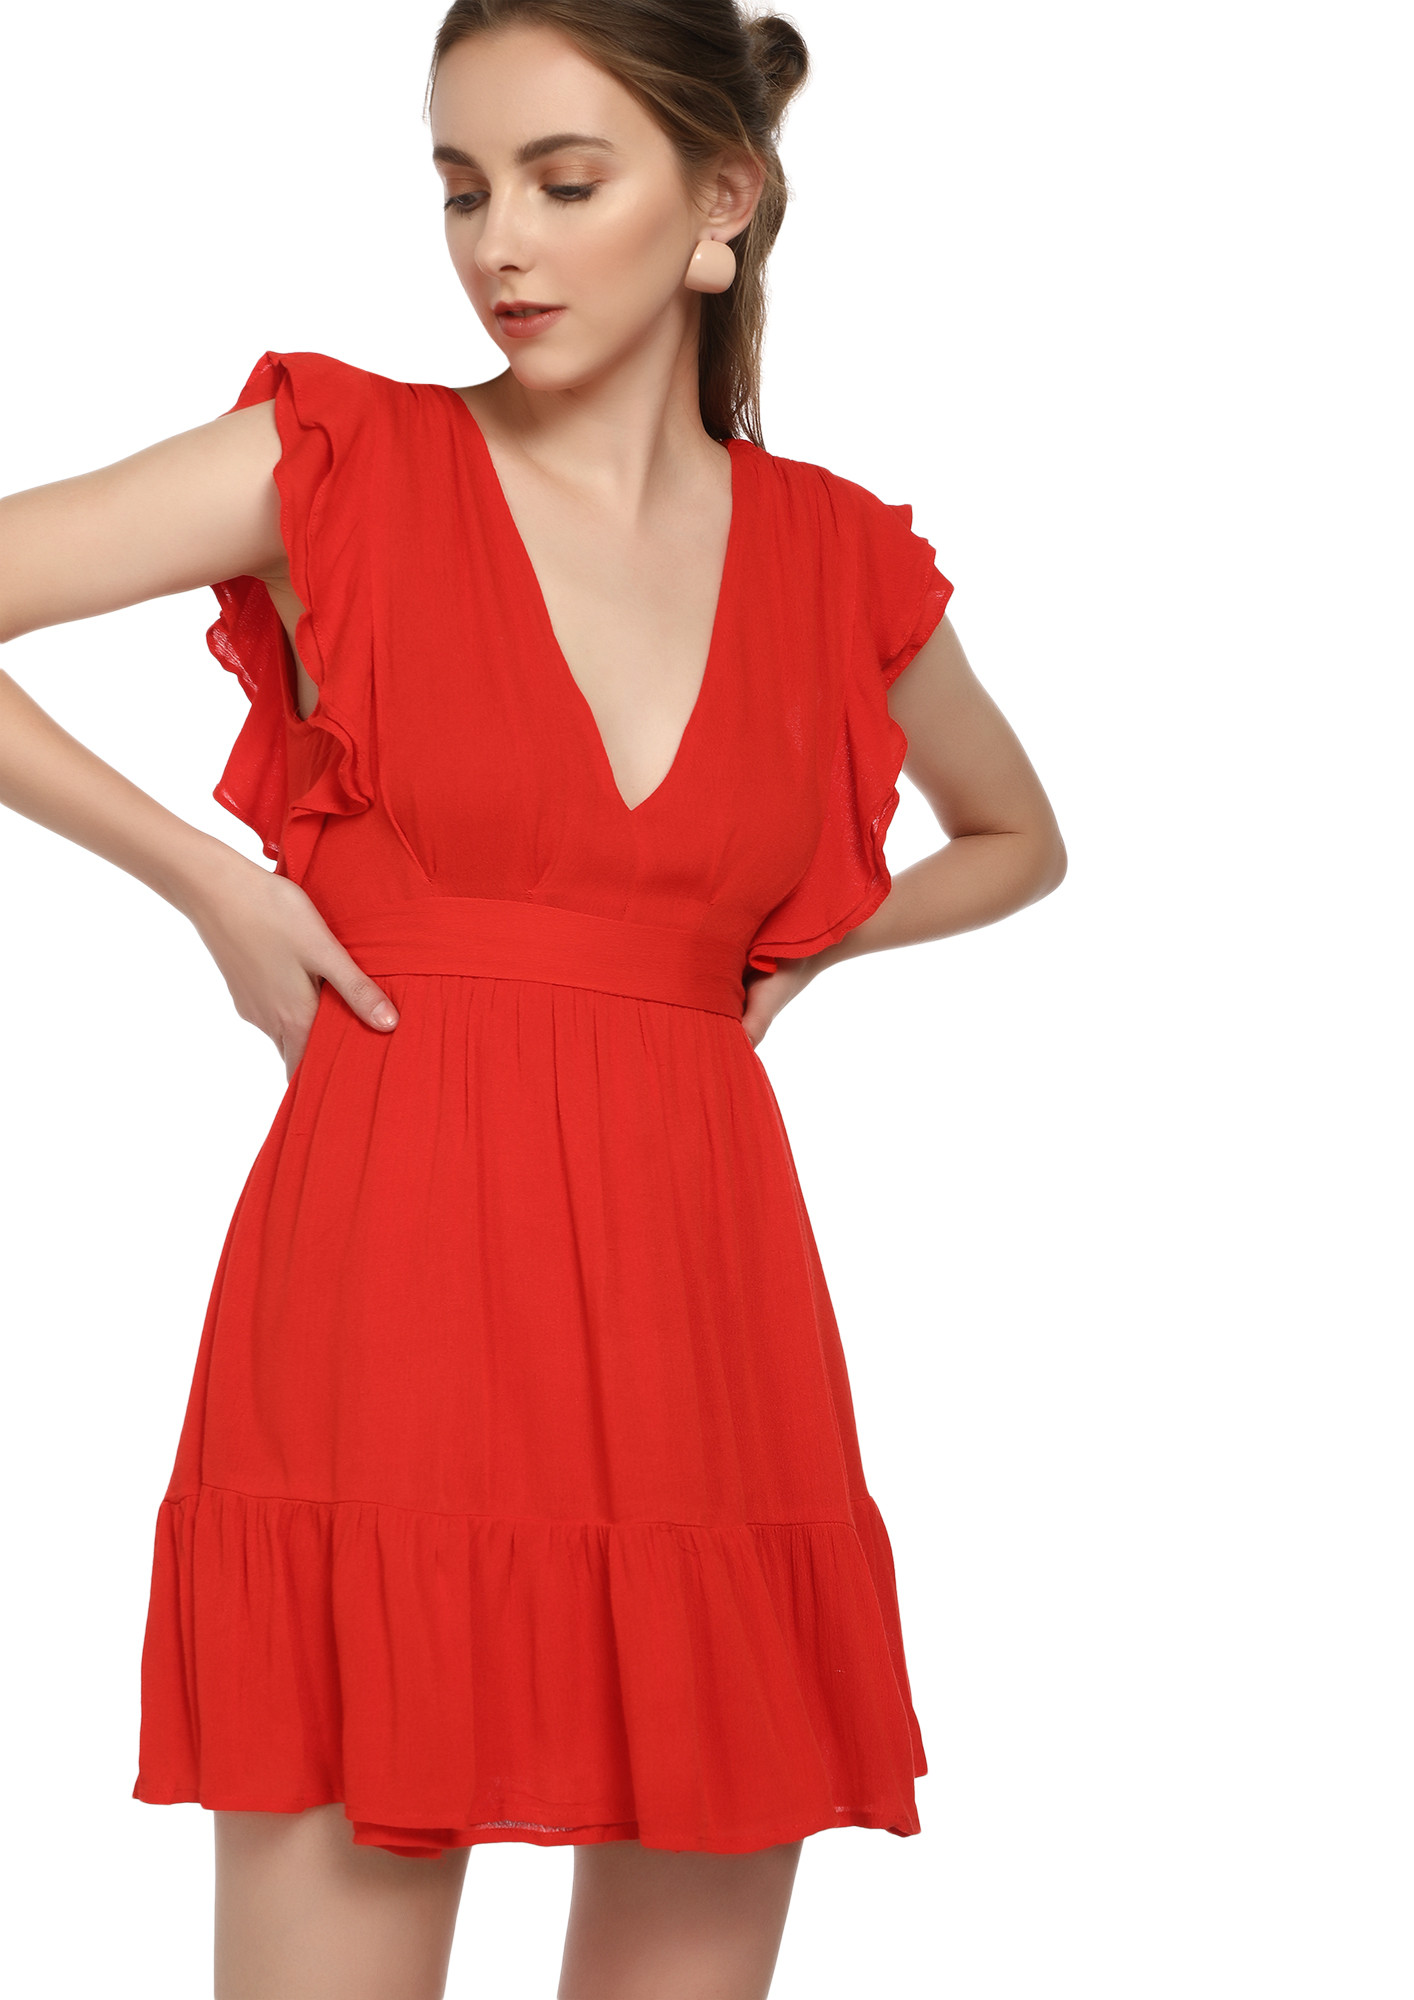 FRILLS AND FEELS RED SKATER DRESS